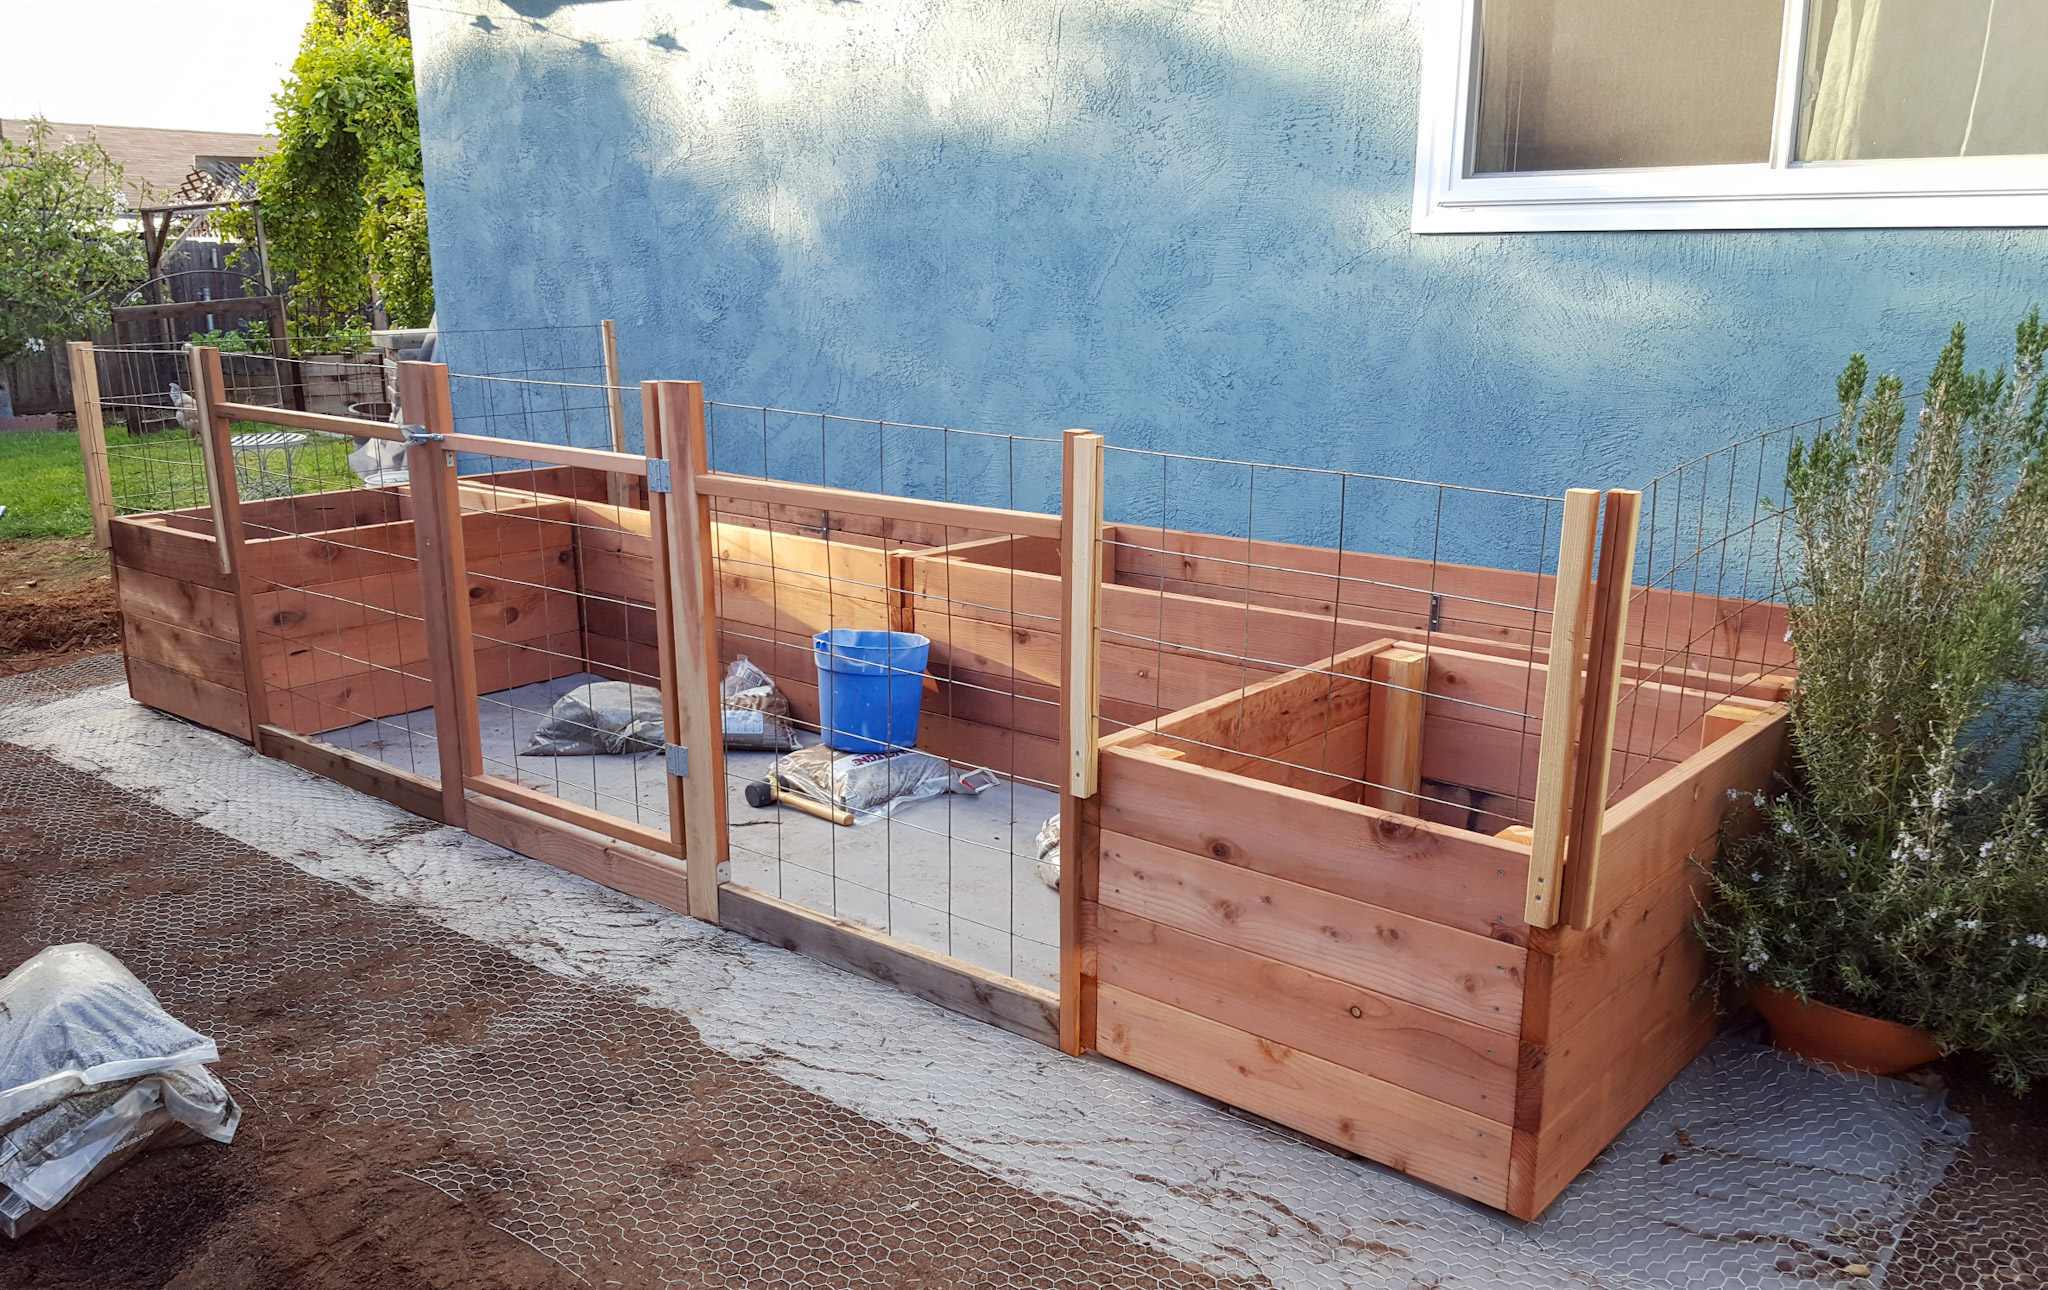 Four garden beds lined up against a house set in a U-shape. The beds are sitting on top of a layer of weed block fabric. There is fencing and a gate built into the front side of the garden beds where it would be open to chickens or other critters that is made with redwood 2x2's, 2x4's, and concrete remesh material. 